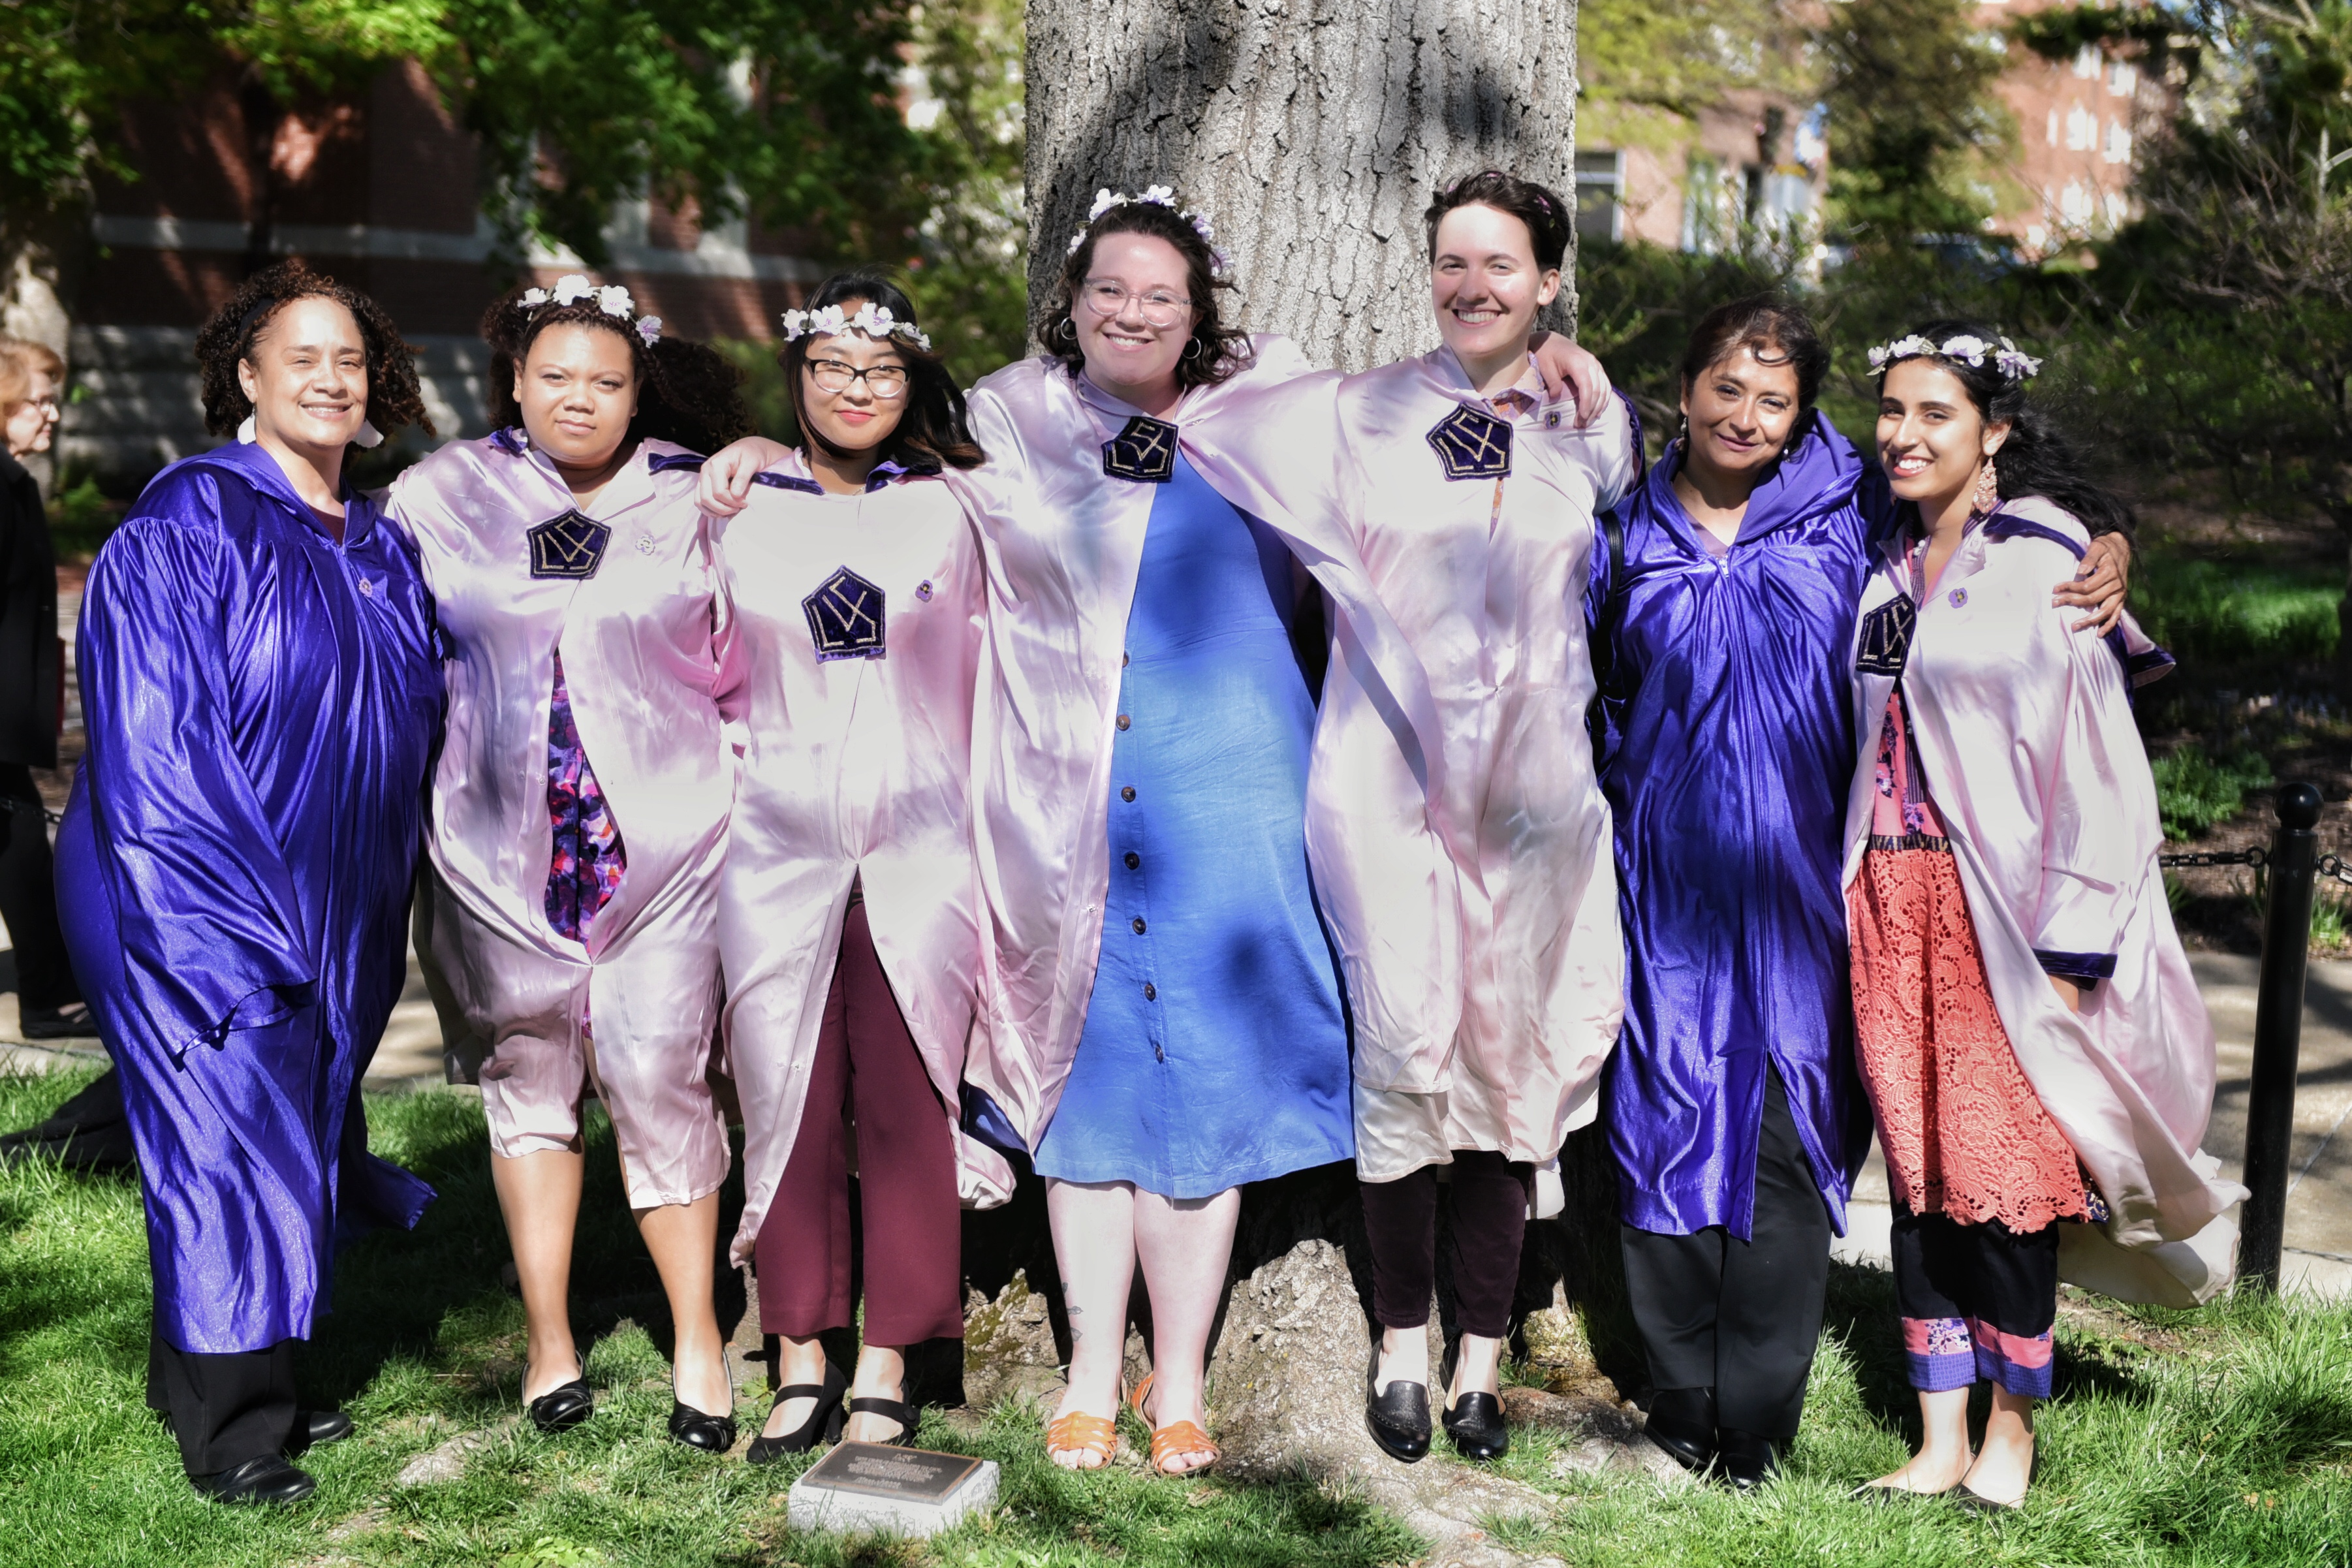 Group photo of new LSV members in pink and purple robes